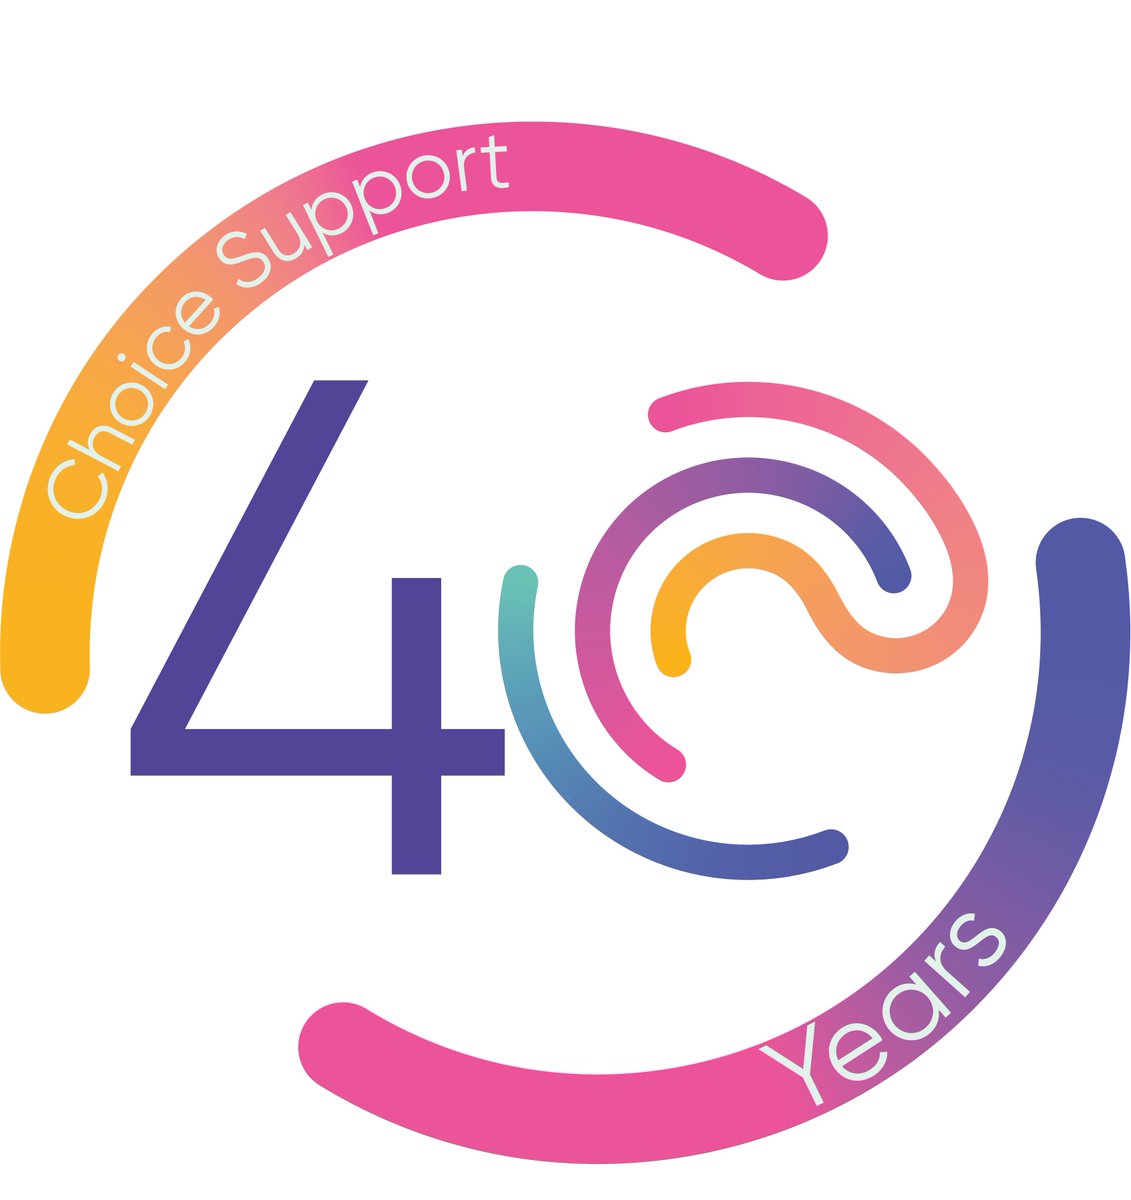 Choice Support is turning 40! 
We have many exciting things lined up to celebrate the 40 years we’ve been providing support to countless people across the UK. We’re starting things off with a shiny new logo.
#LearningDisabilities #Autism #MentalHealth #SupportWork #SocialCare